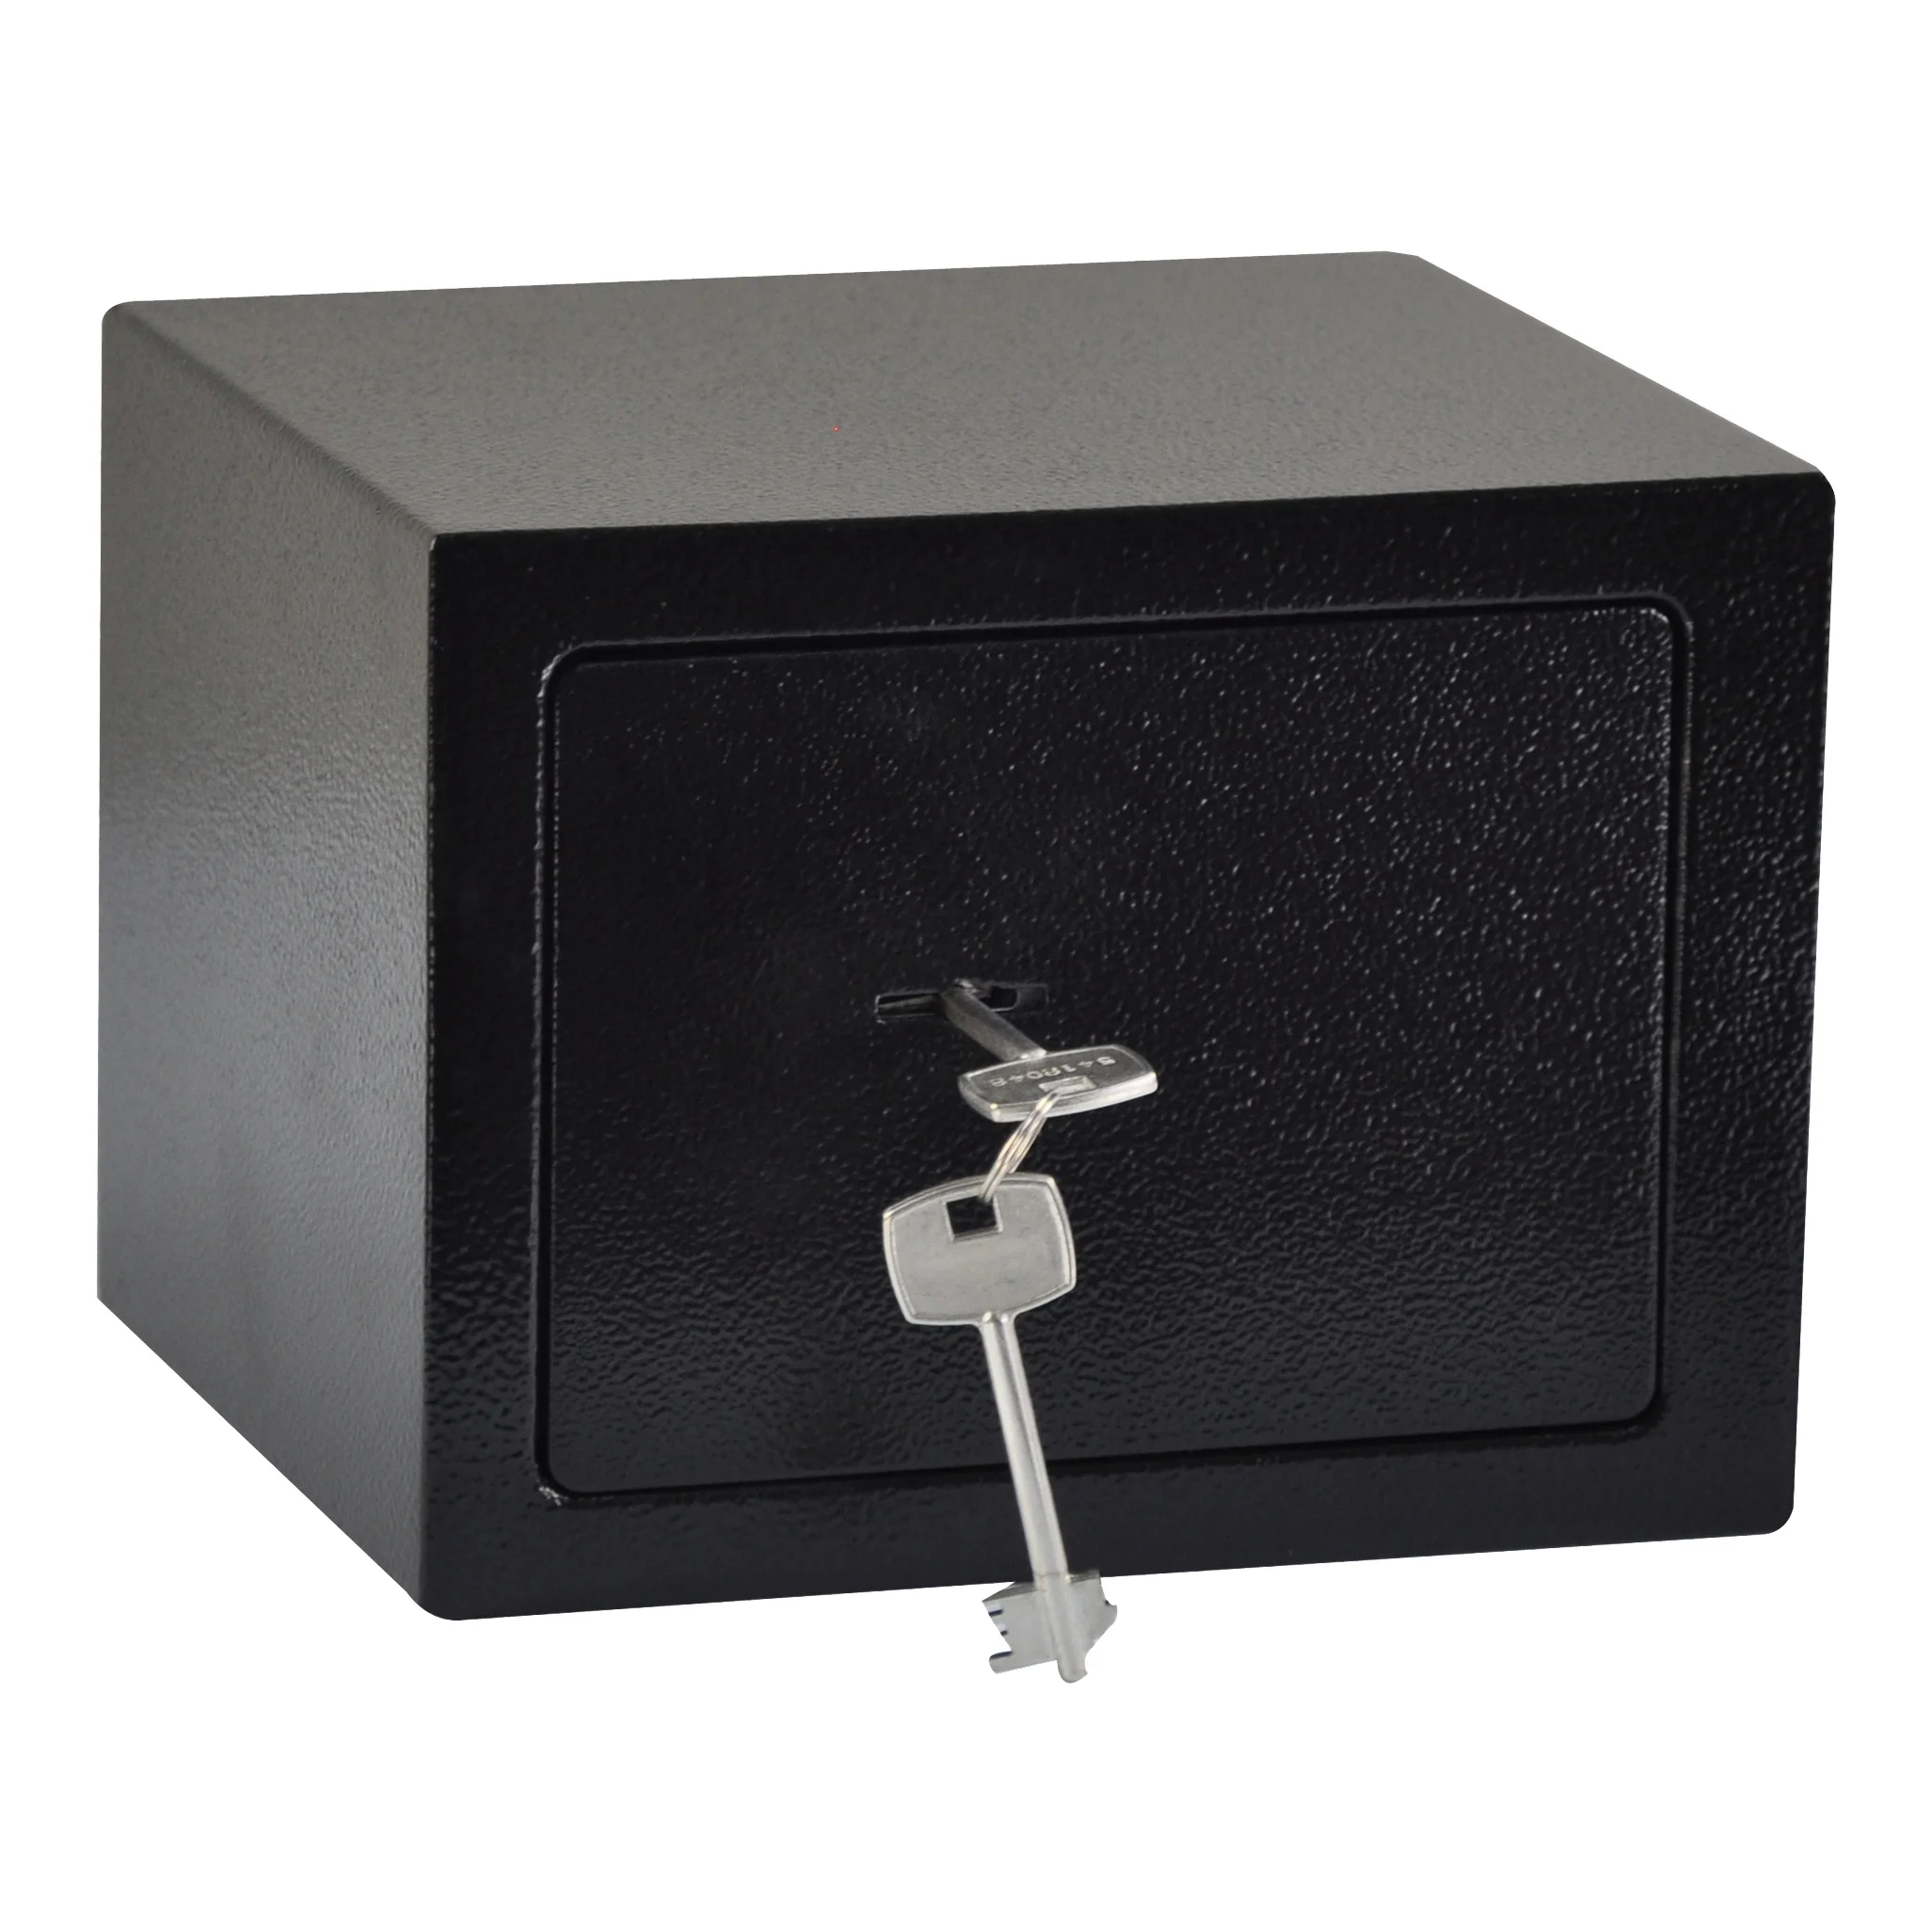 ROOF Cheap Hidden Mini Security Safe With Key Lock T-15K